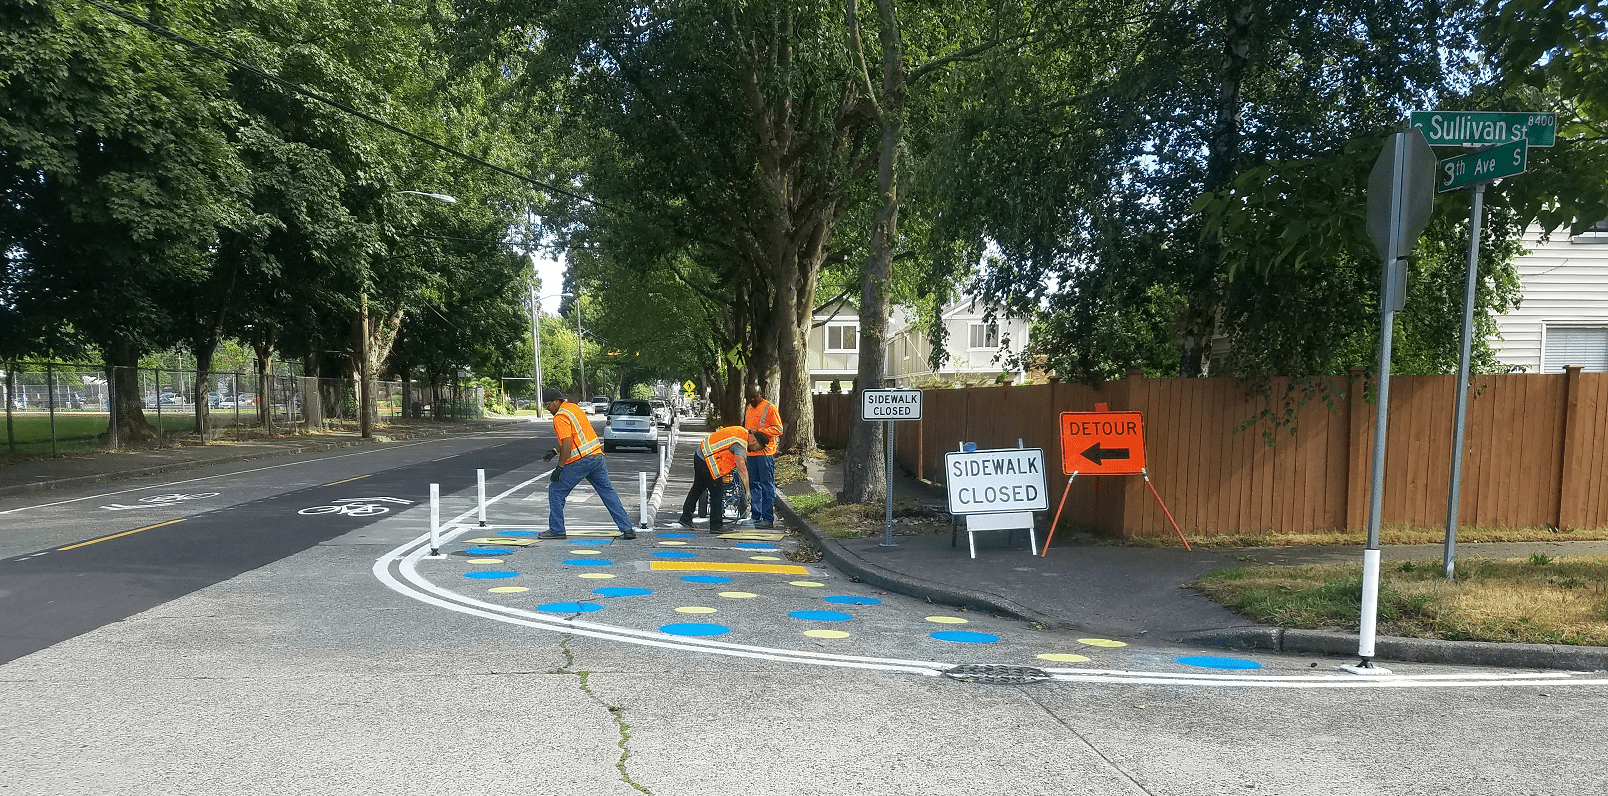 Crew members install a painted curb bulb in South Park, at 8th Ave S and S Sullivan St. Three people can be seen working, with the street visible to the left and in the foreground. Large trees are visible near the top of the image.